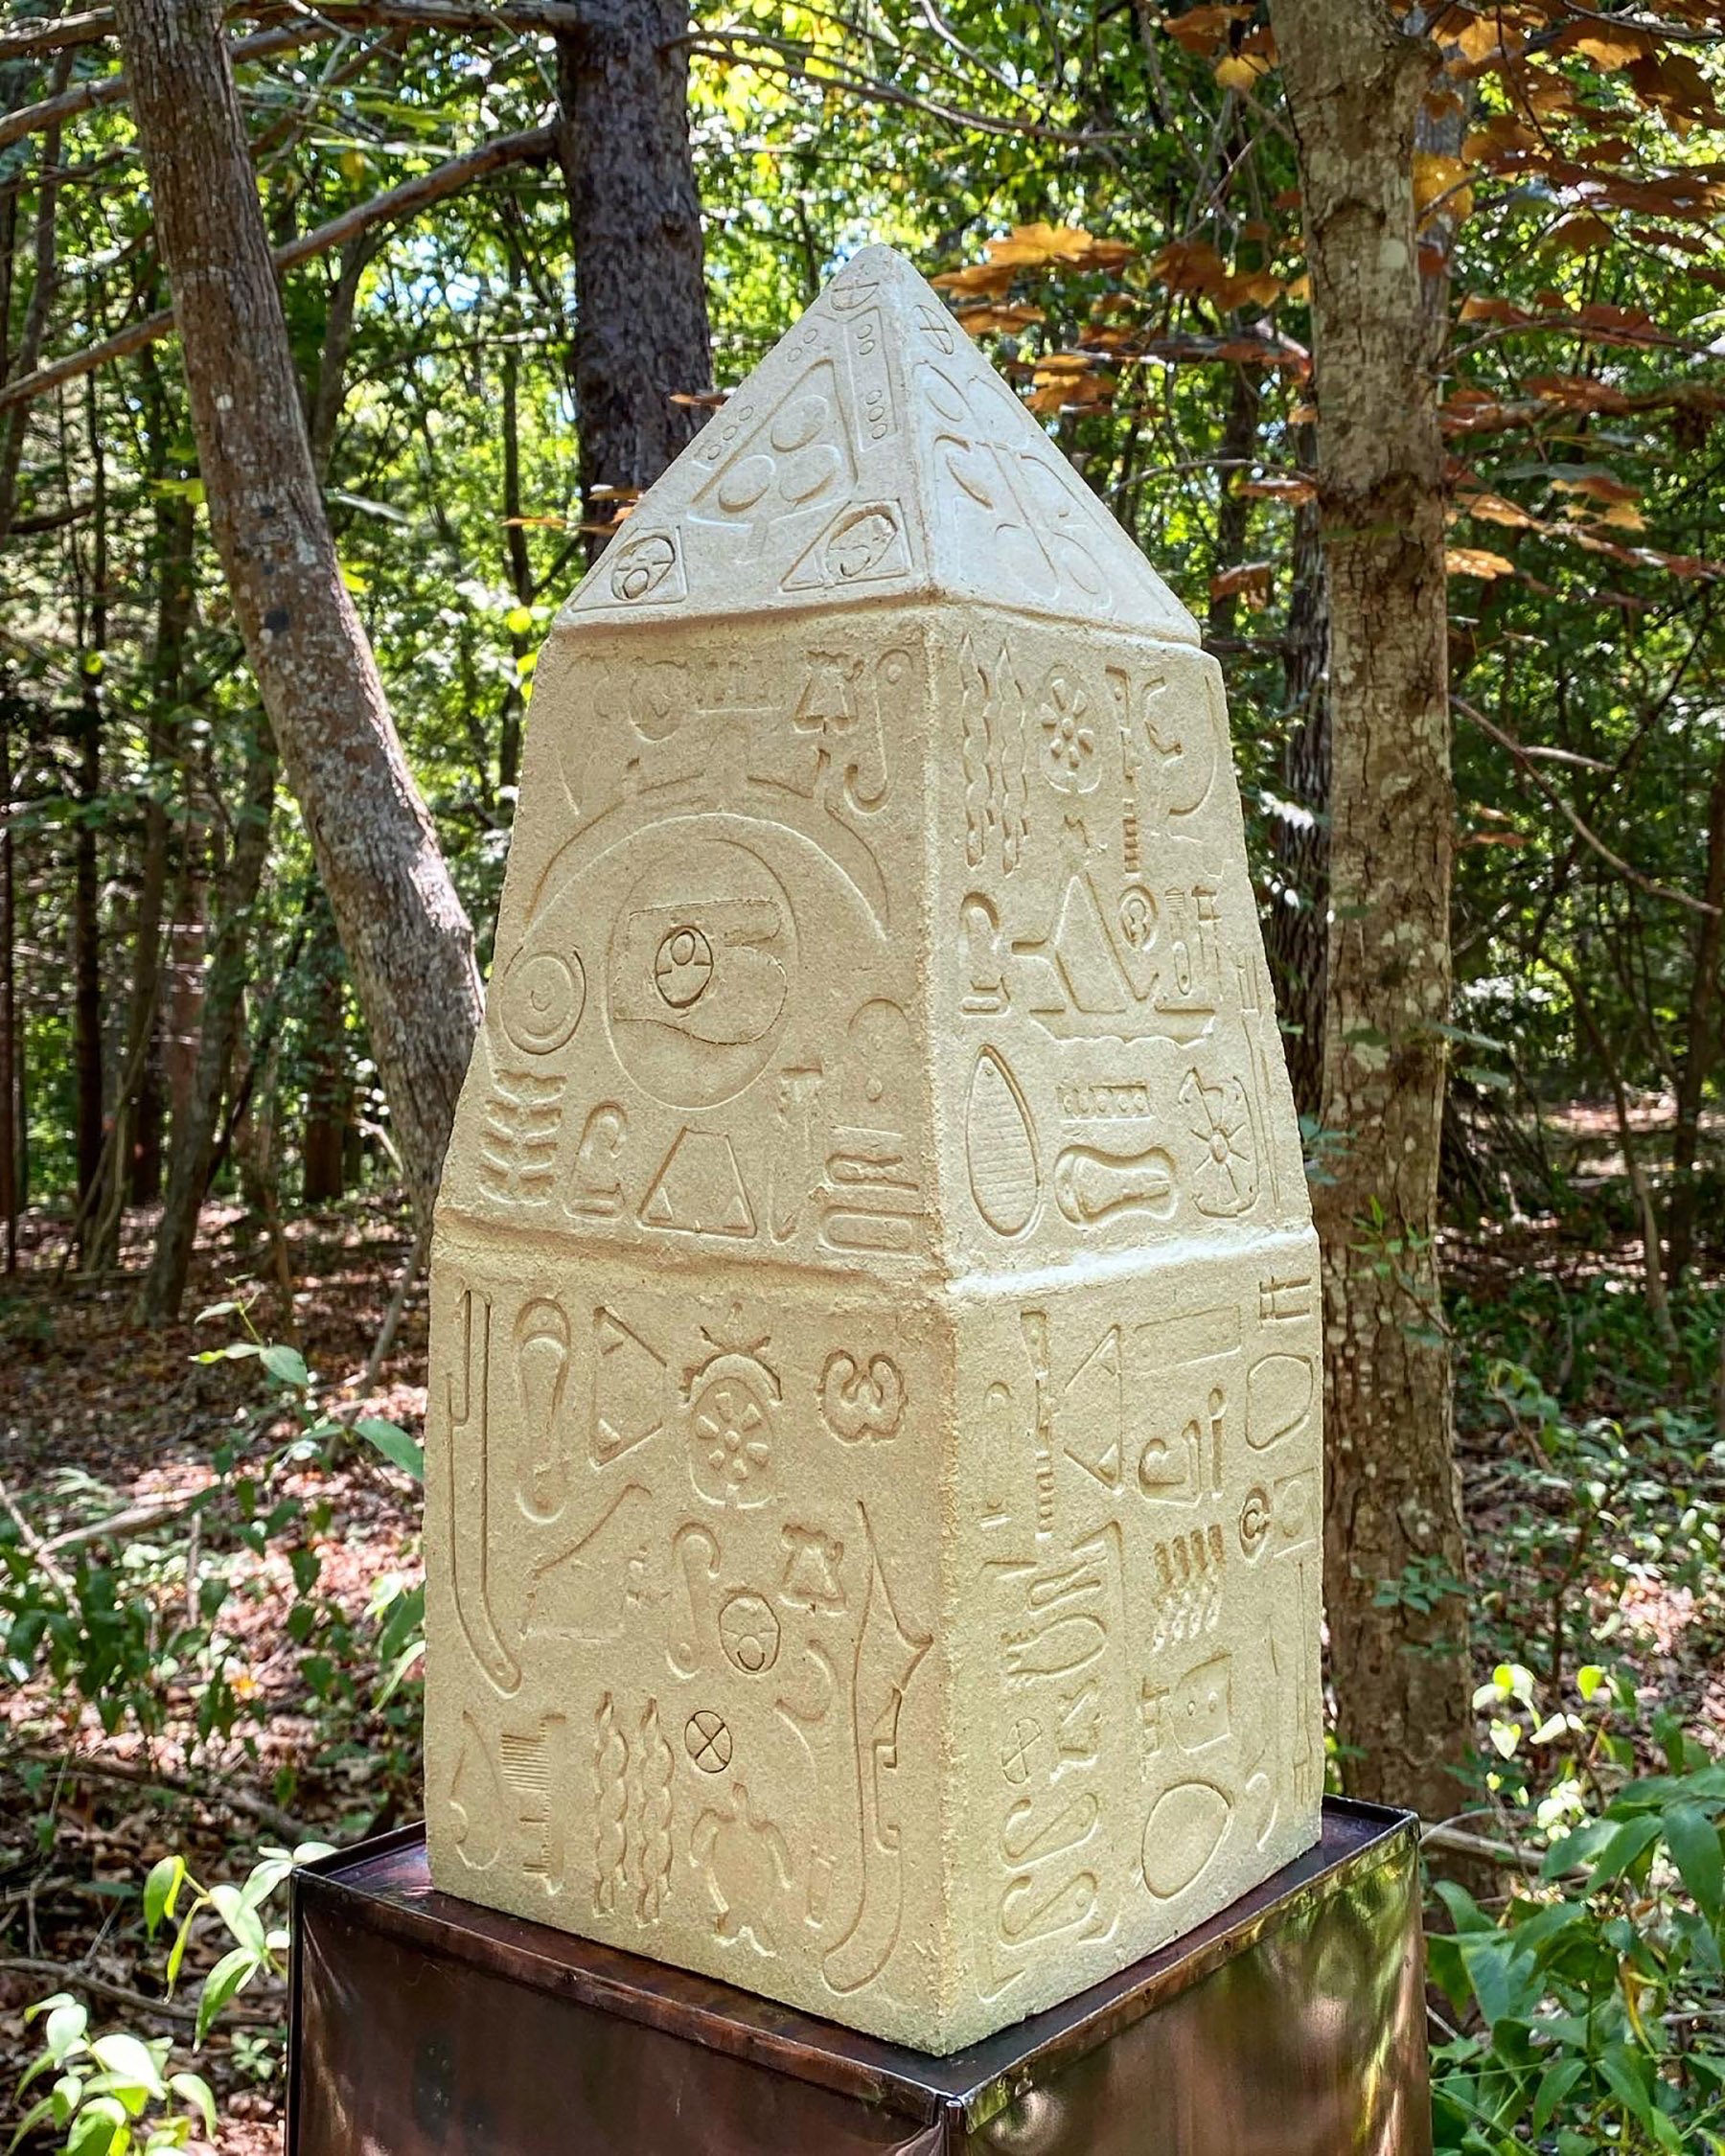    Plastiglyphic Obelisk (Monument to Lost Civilization)    ceramic with copper base  17.5” x 10” x 10” without base  2022  (sold) 